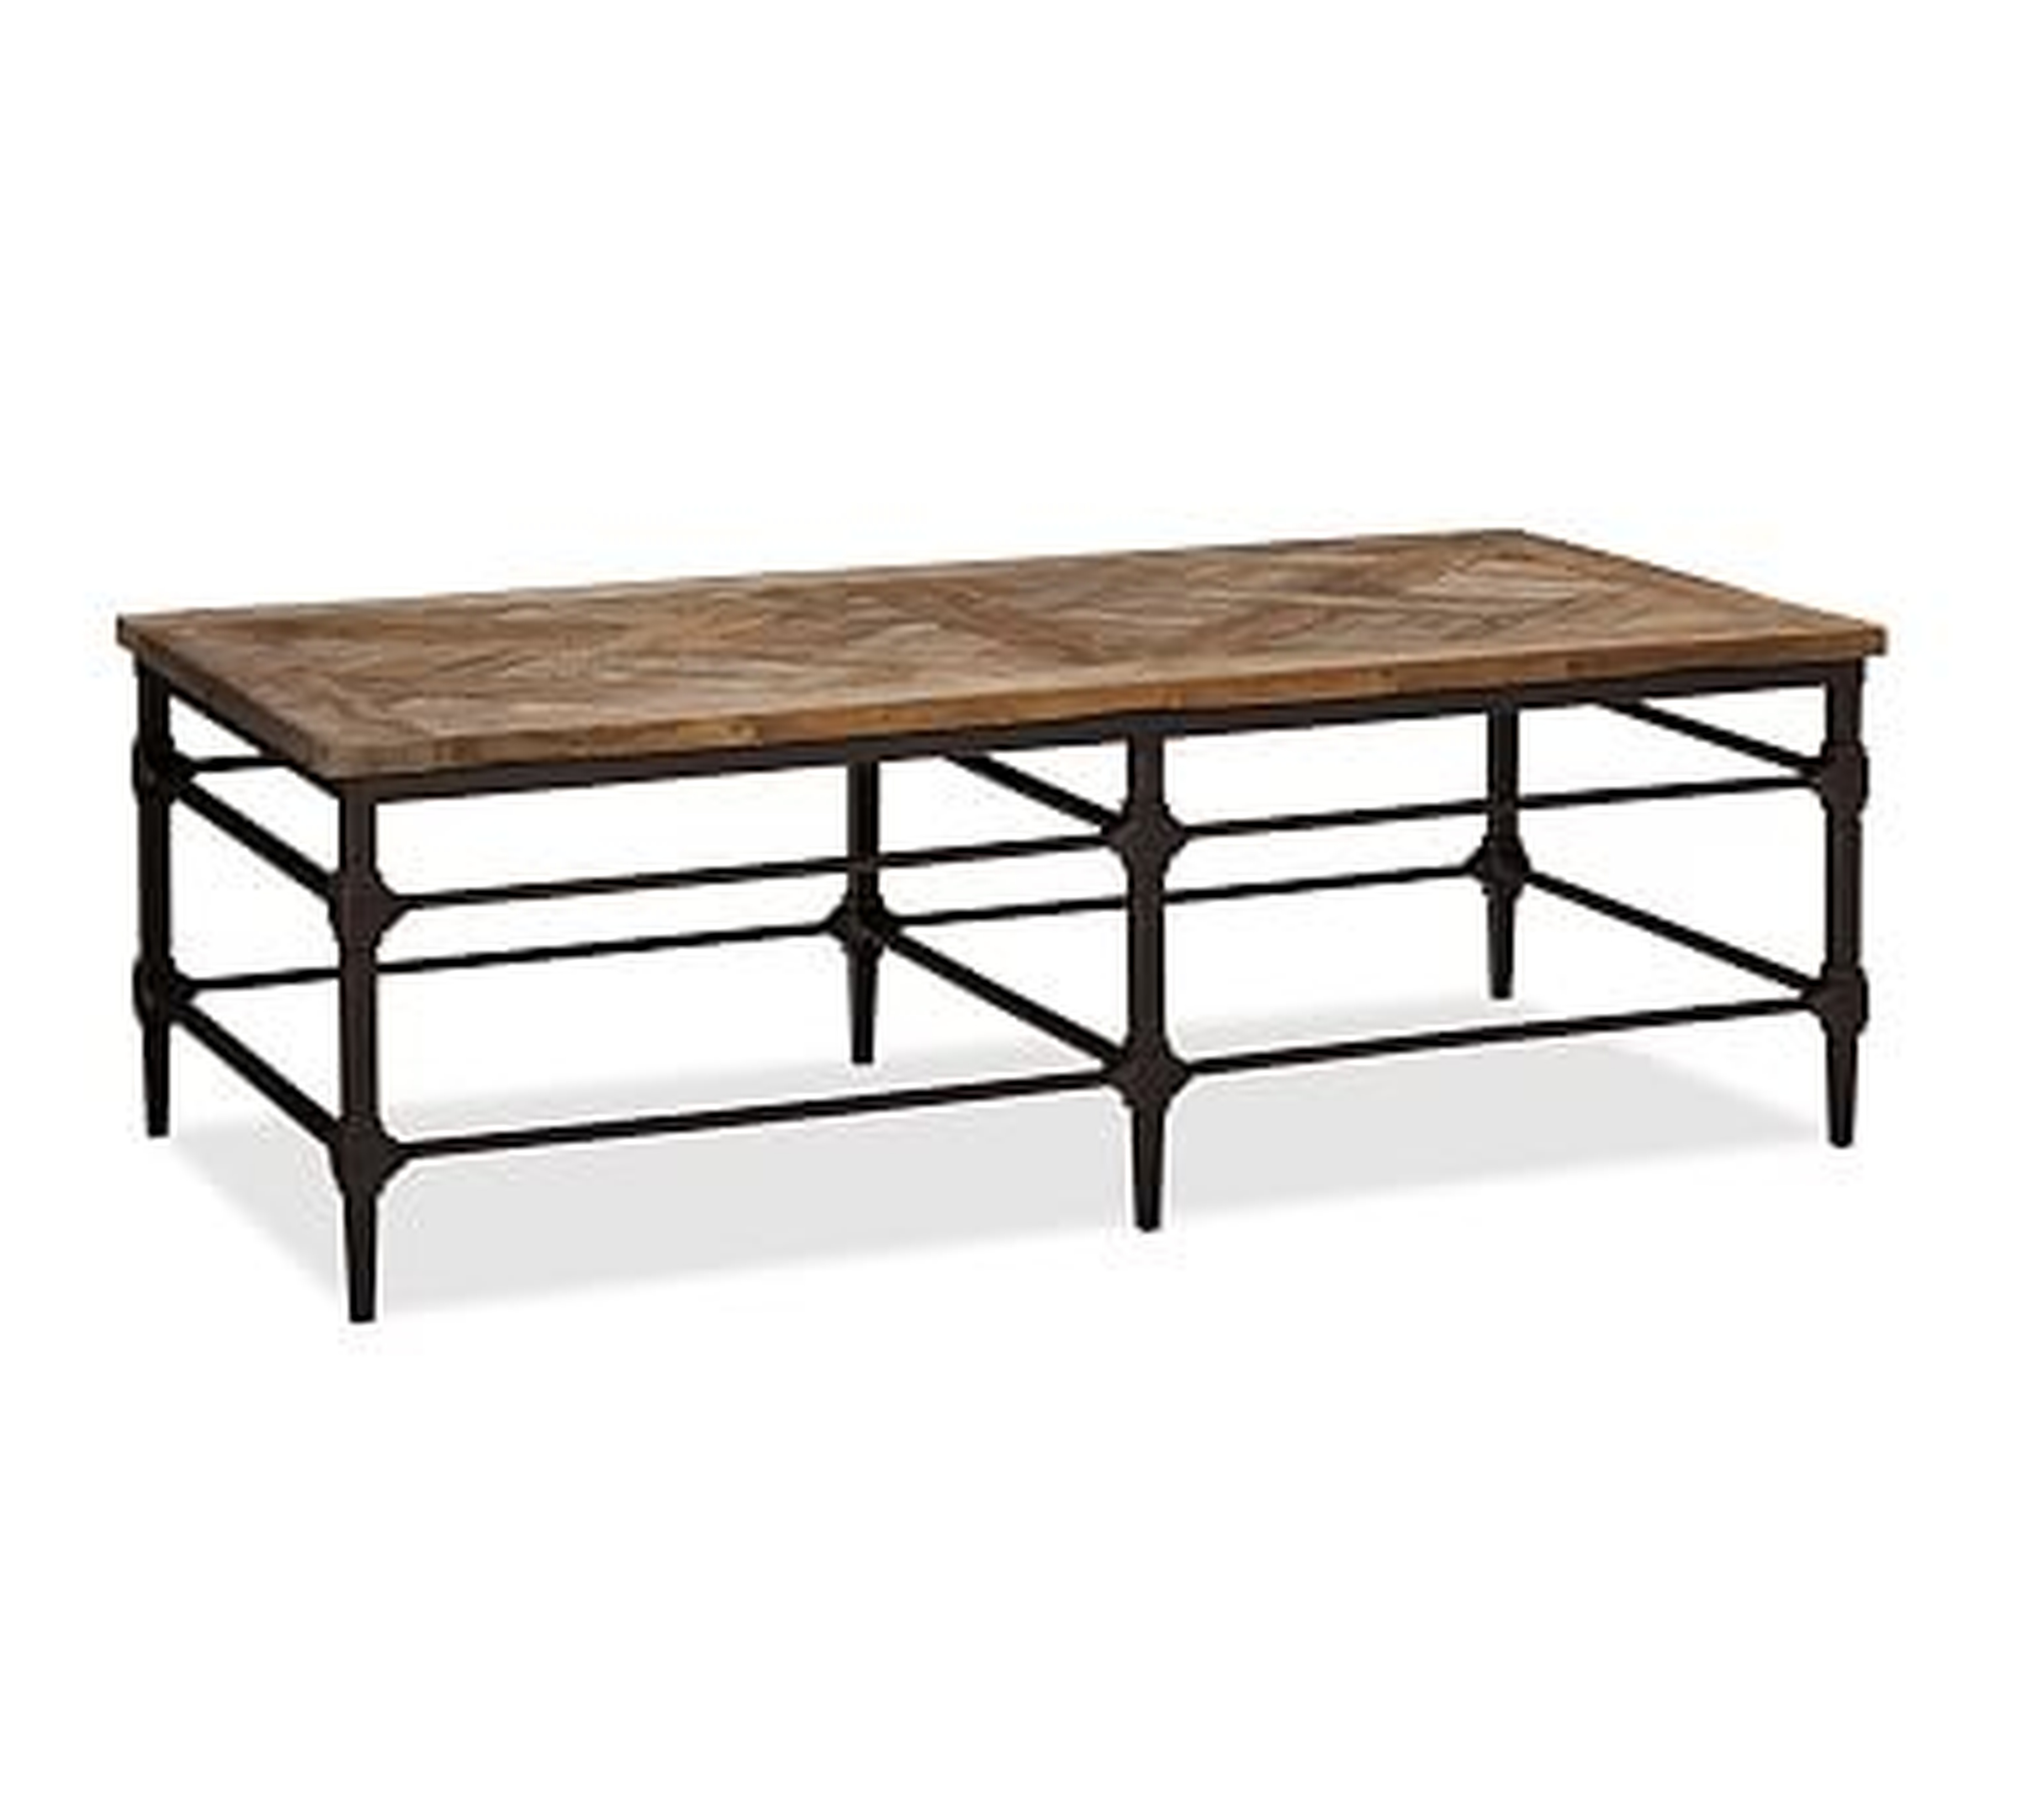 Parquet Reclaimed Wood & Metal Rectangular Coffee Table - Pottery Barn